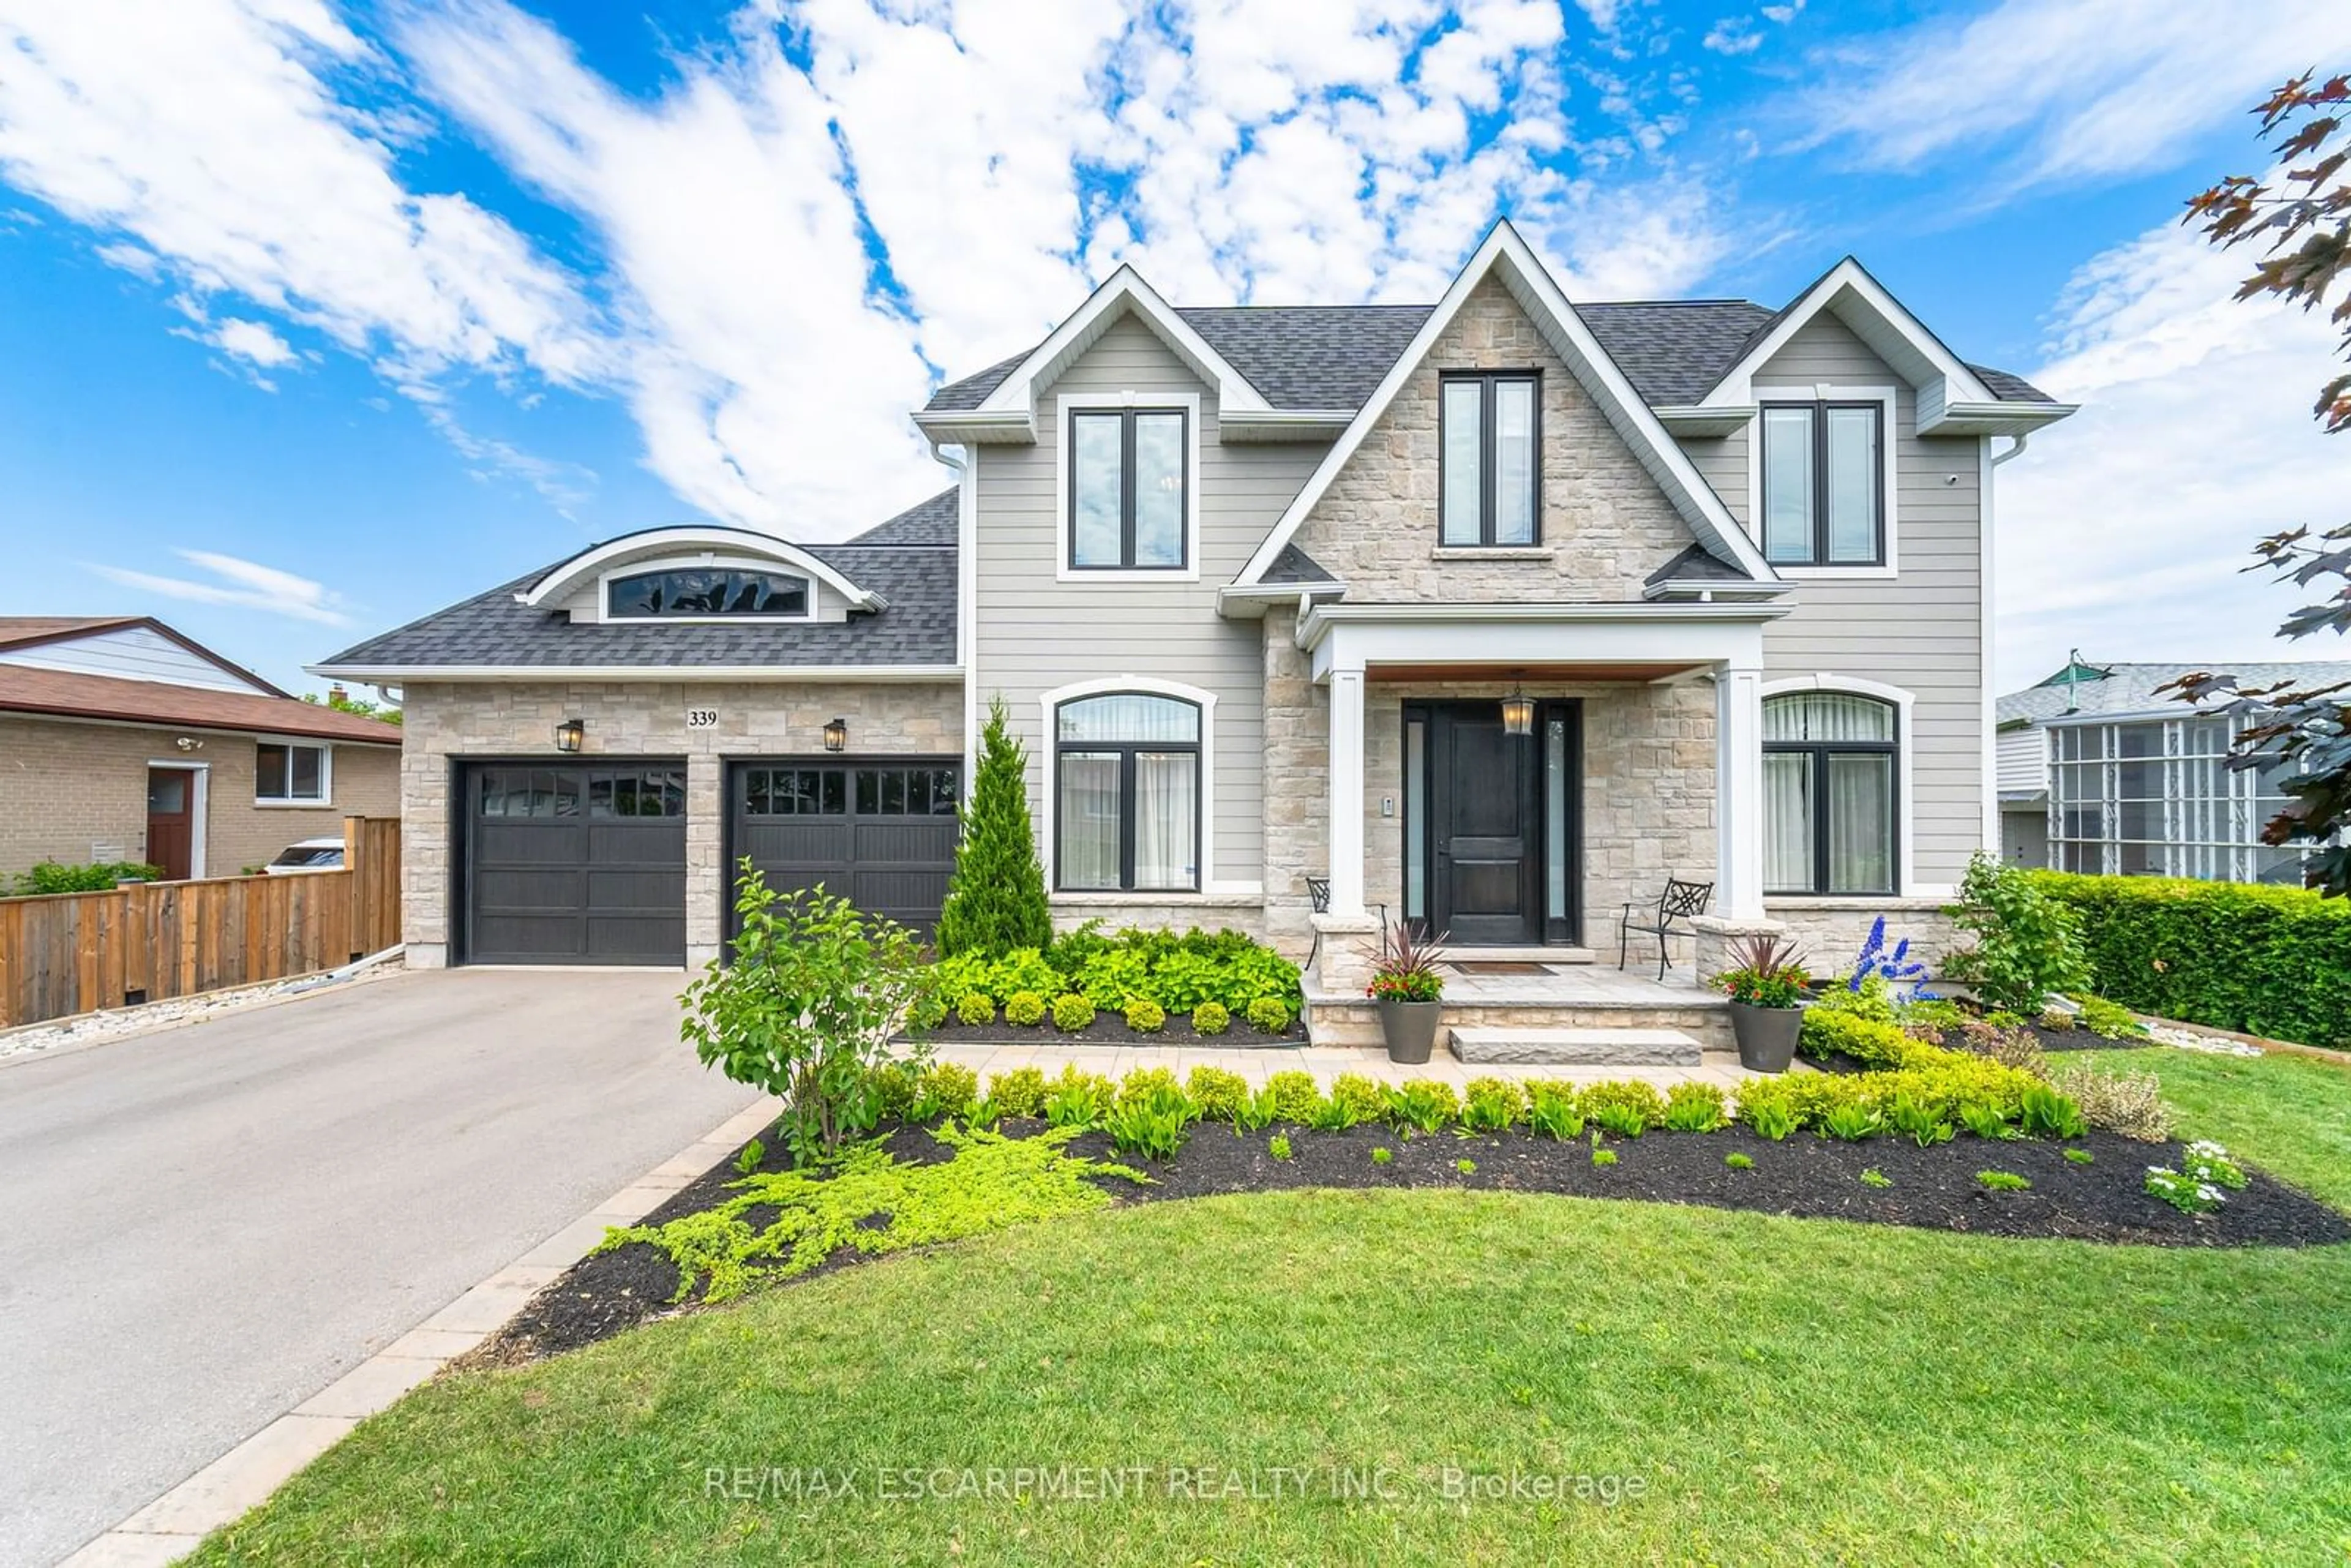 Home with brick exterior material for 339 Morden Rd, Oakville Ontario L6K 2S9